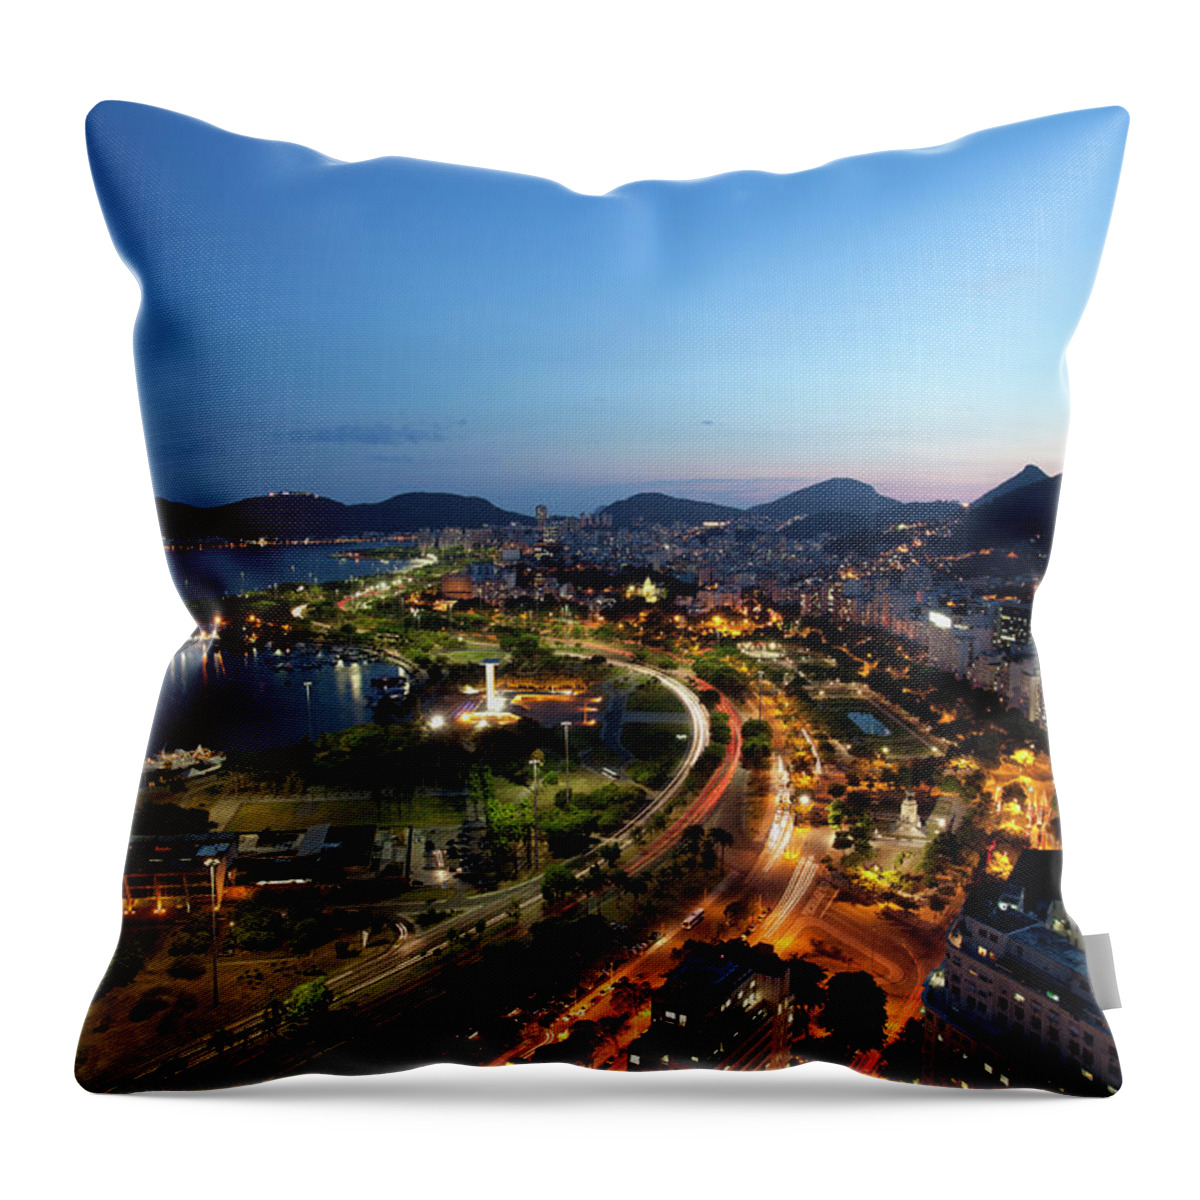 Scenics Throw Pillow featuring the photograph Rio De Janeiro At Night by Brasil2